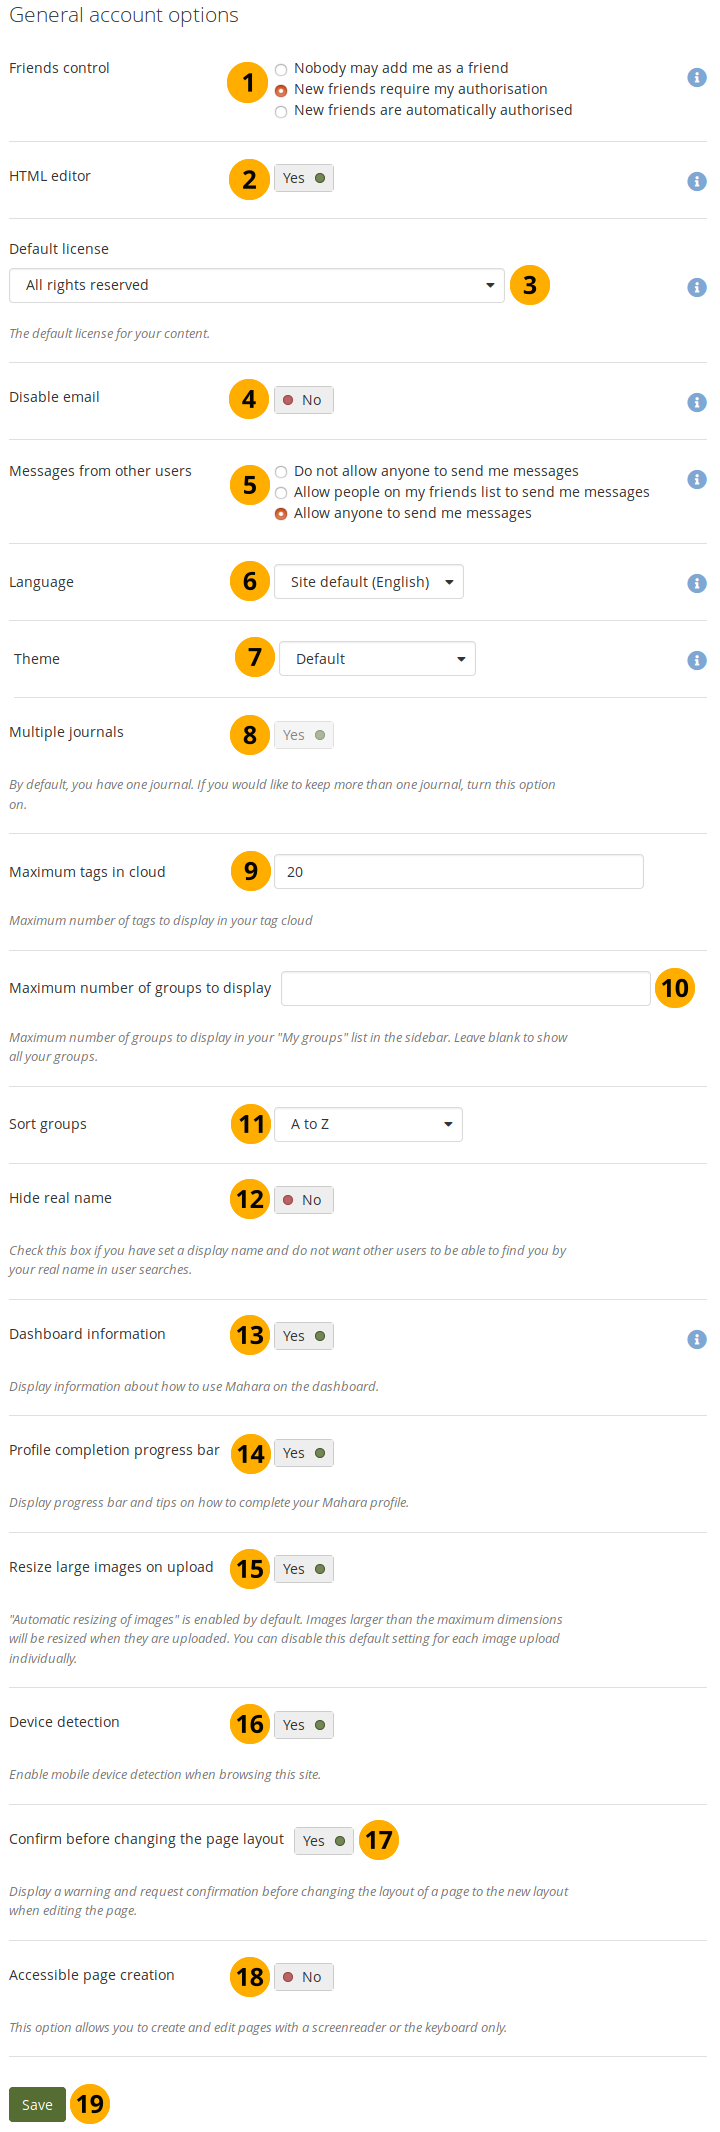 View and change your general account options